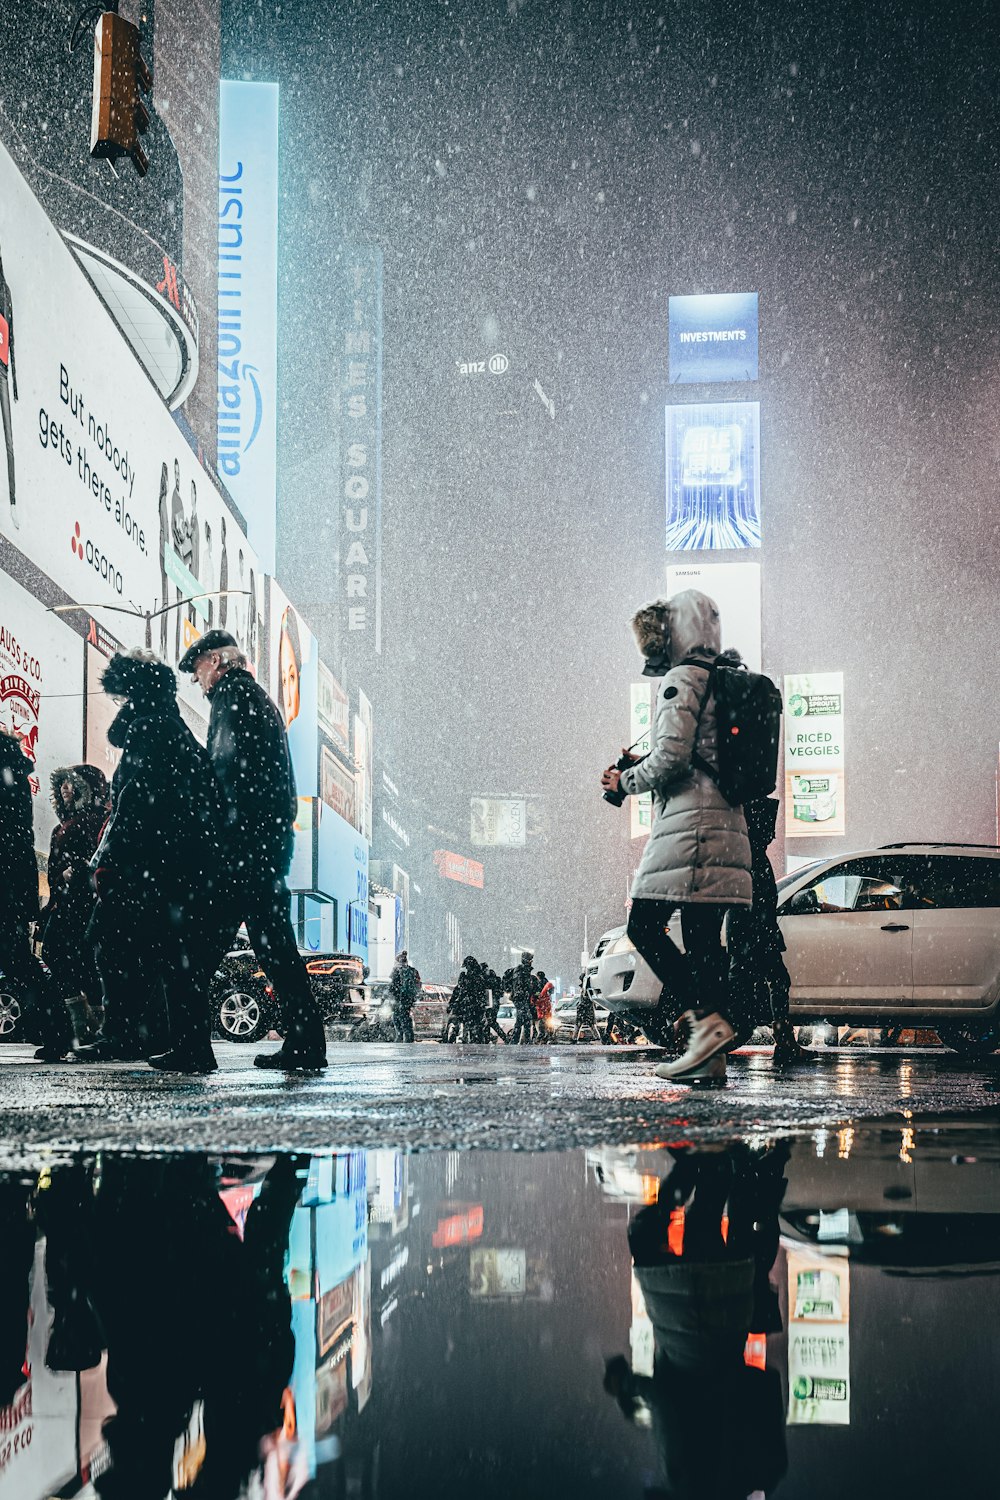 a group of people crossing a street in the rain